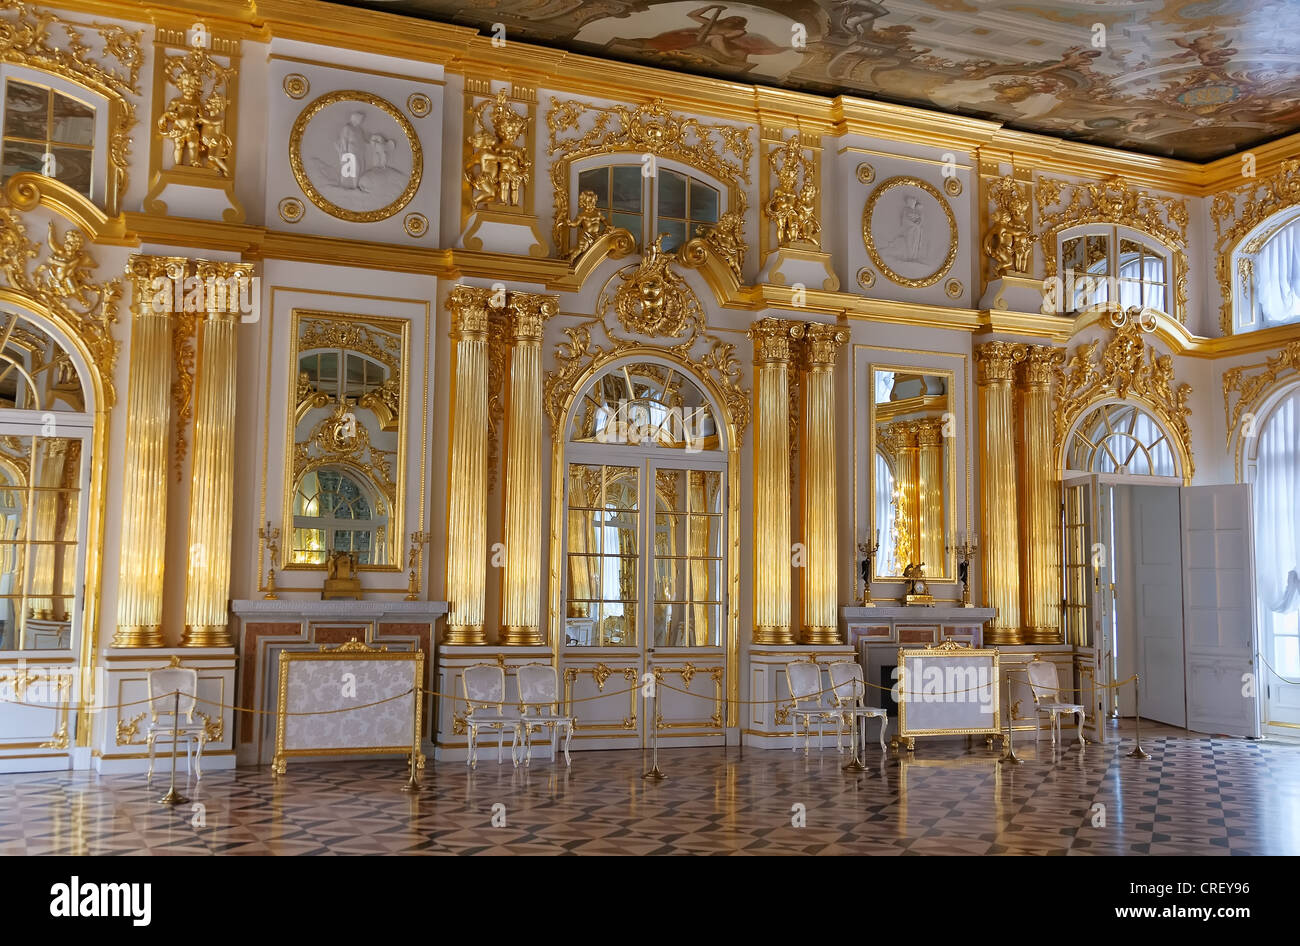 The interior of the luxurious Catherine Palace Stock Photo